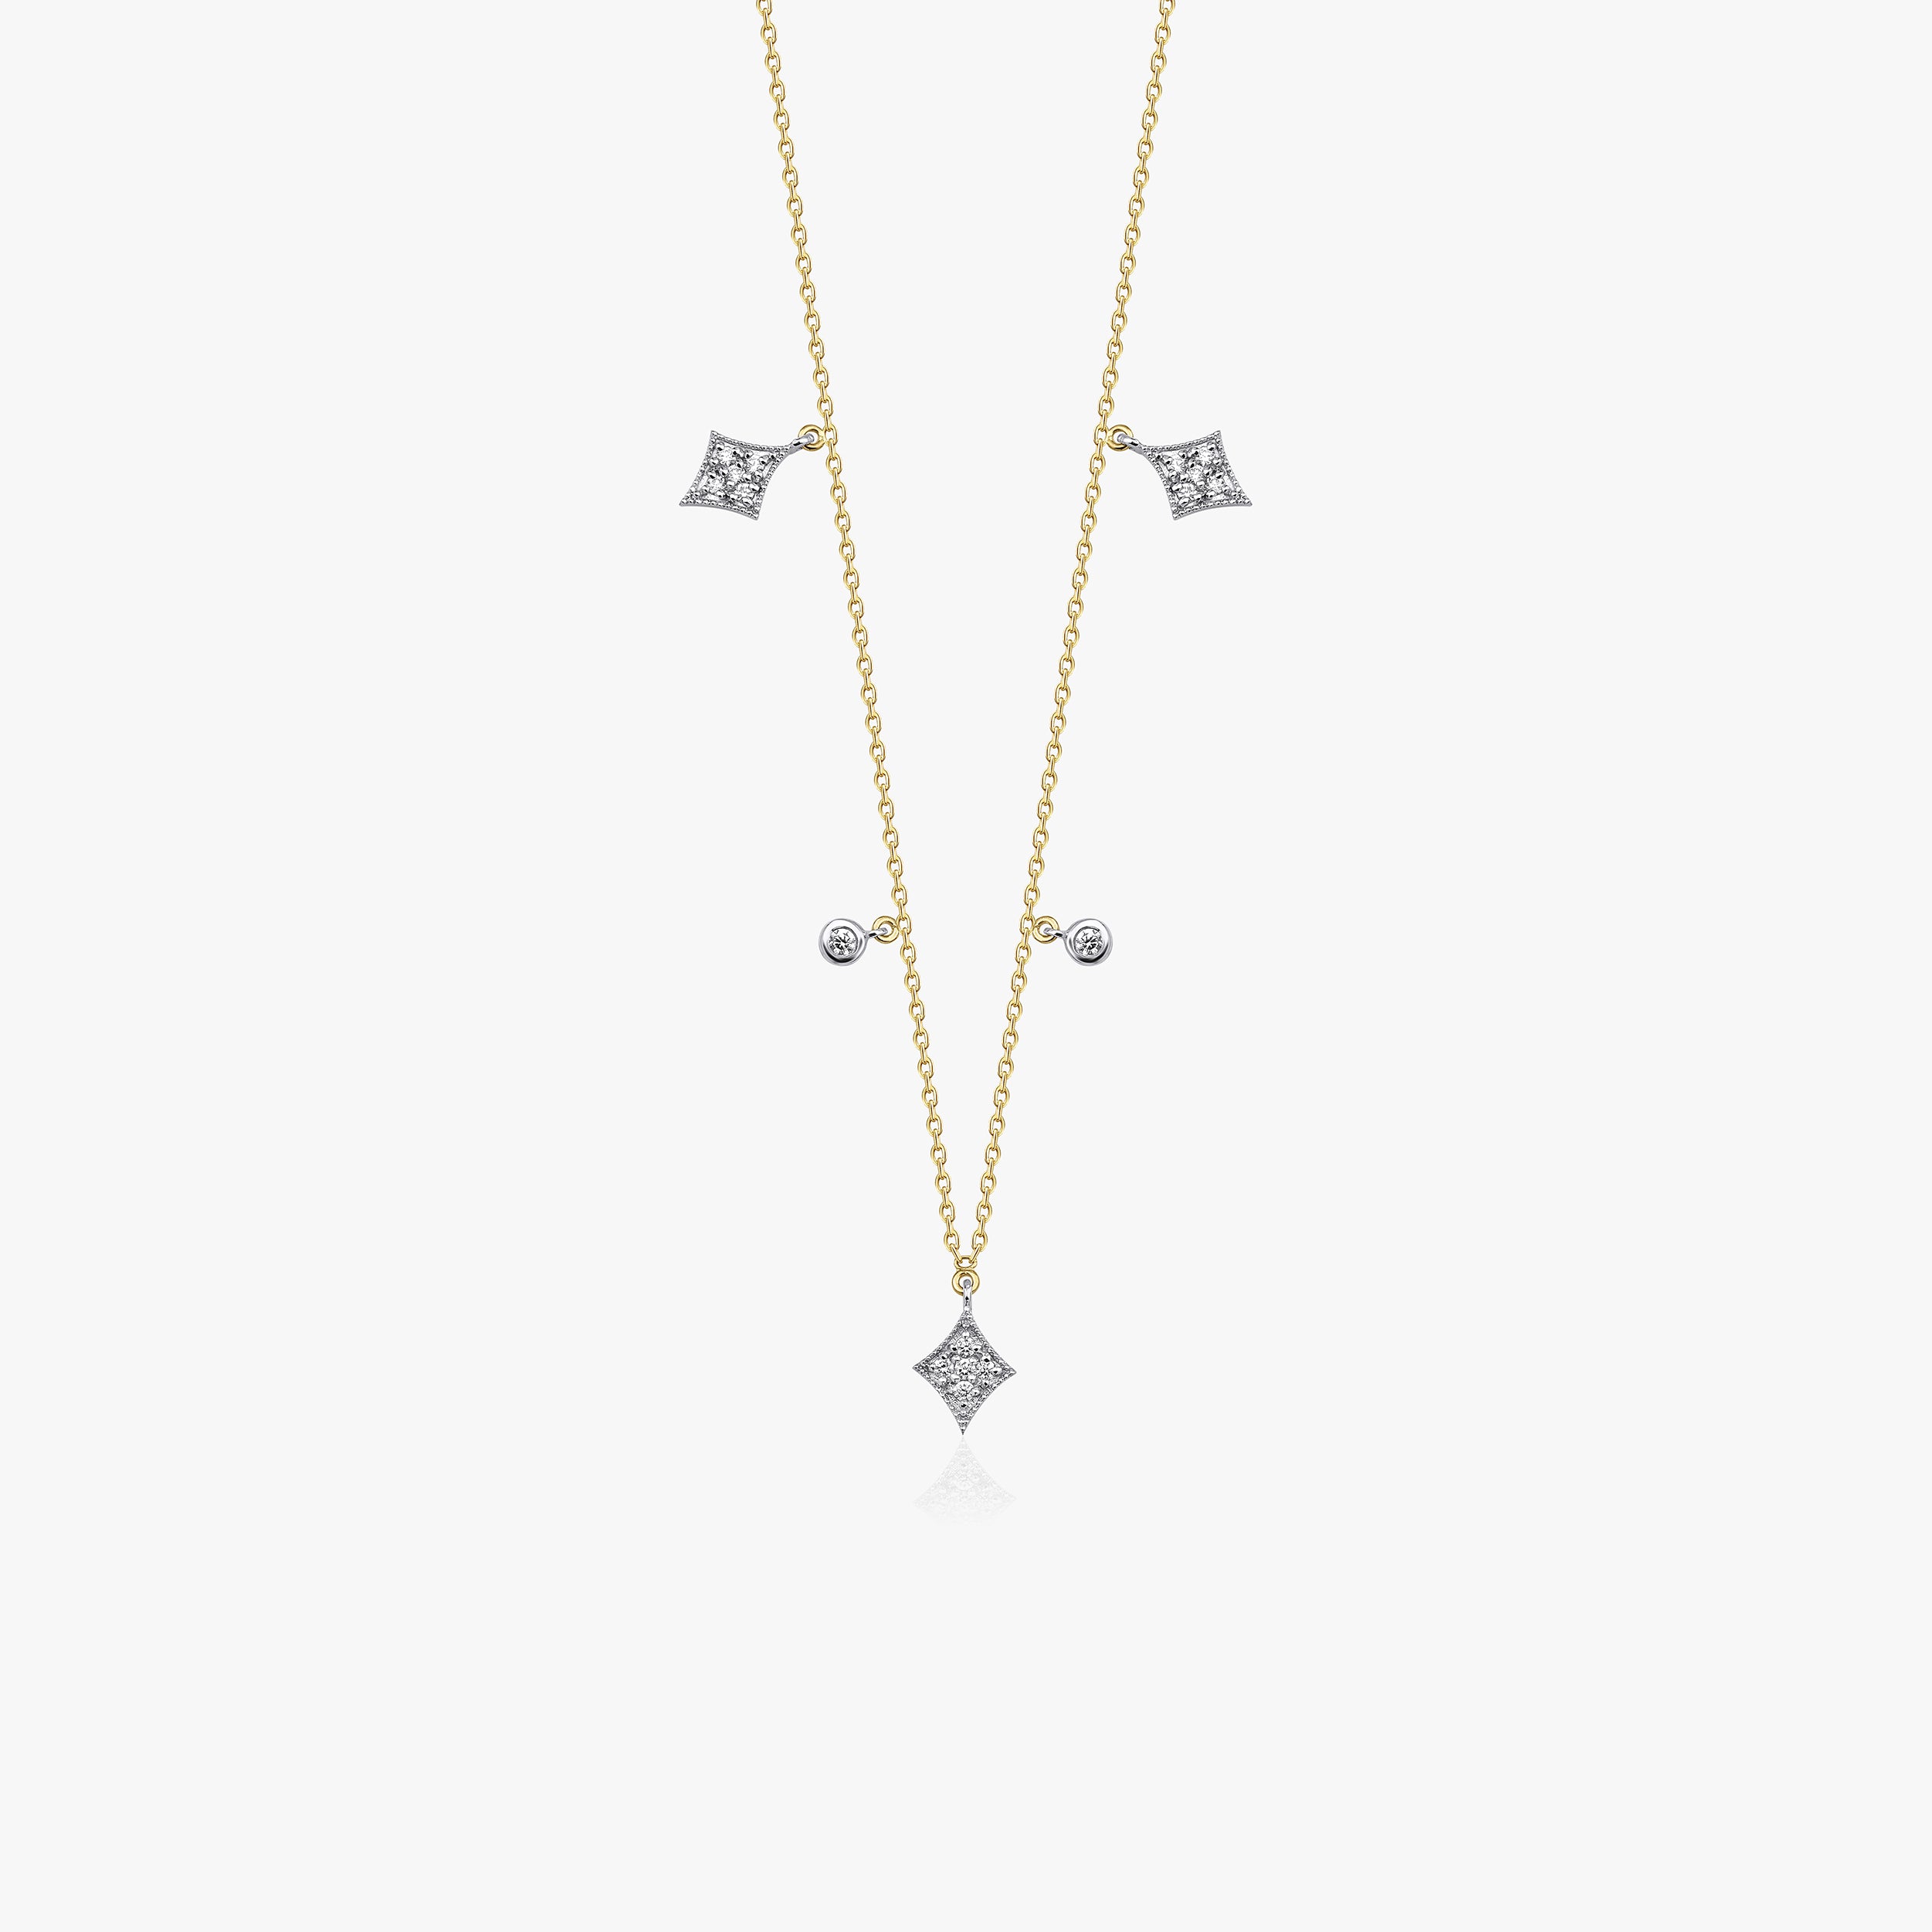 Diamond Dangle Necklace Available in 14K and 18K Gold